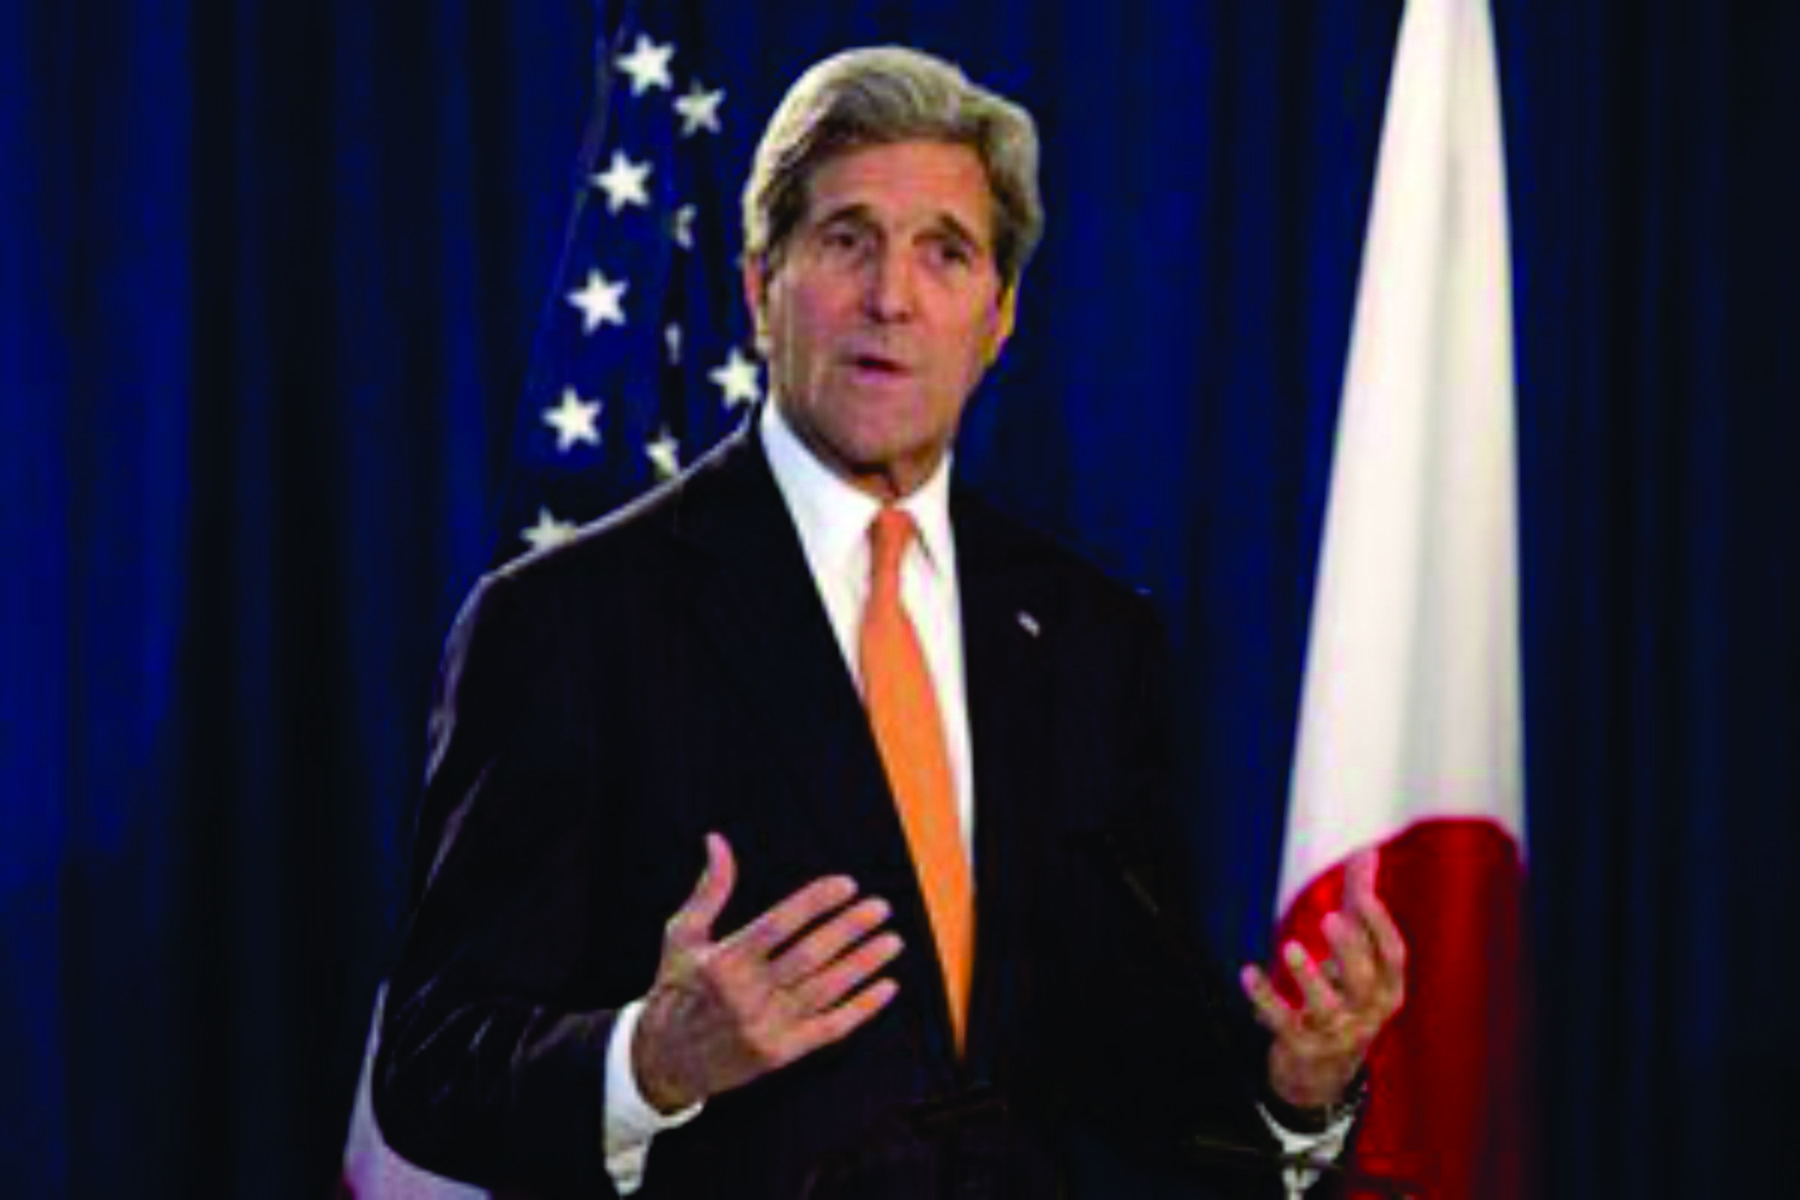 Kerry will travel to SL on Saturday- State Dept.